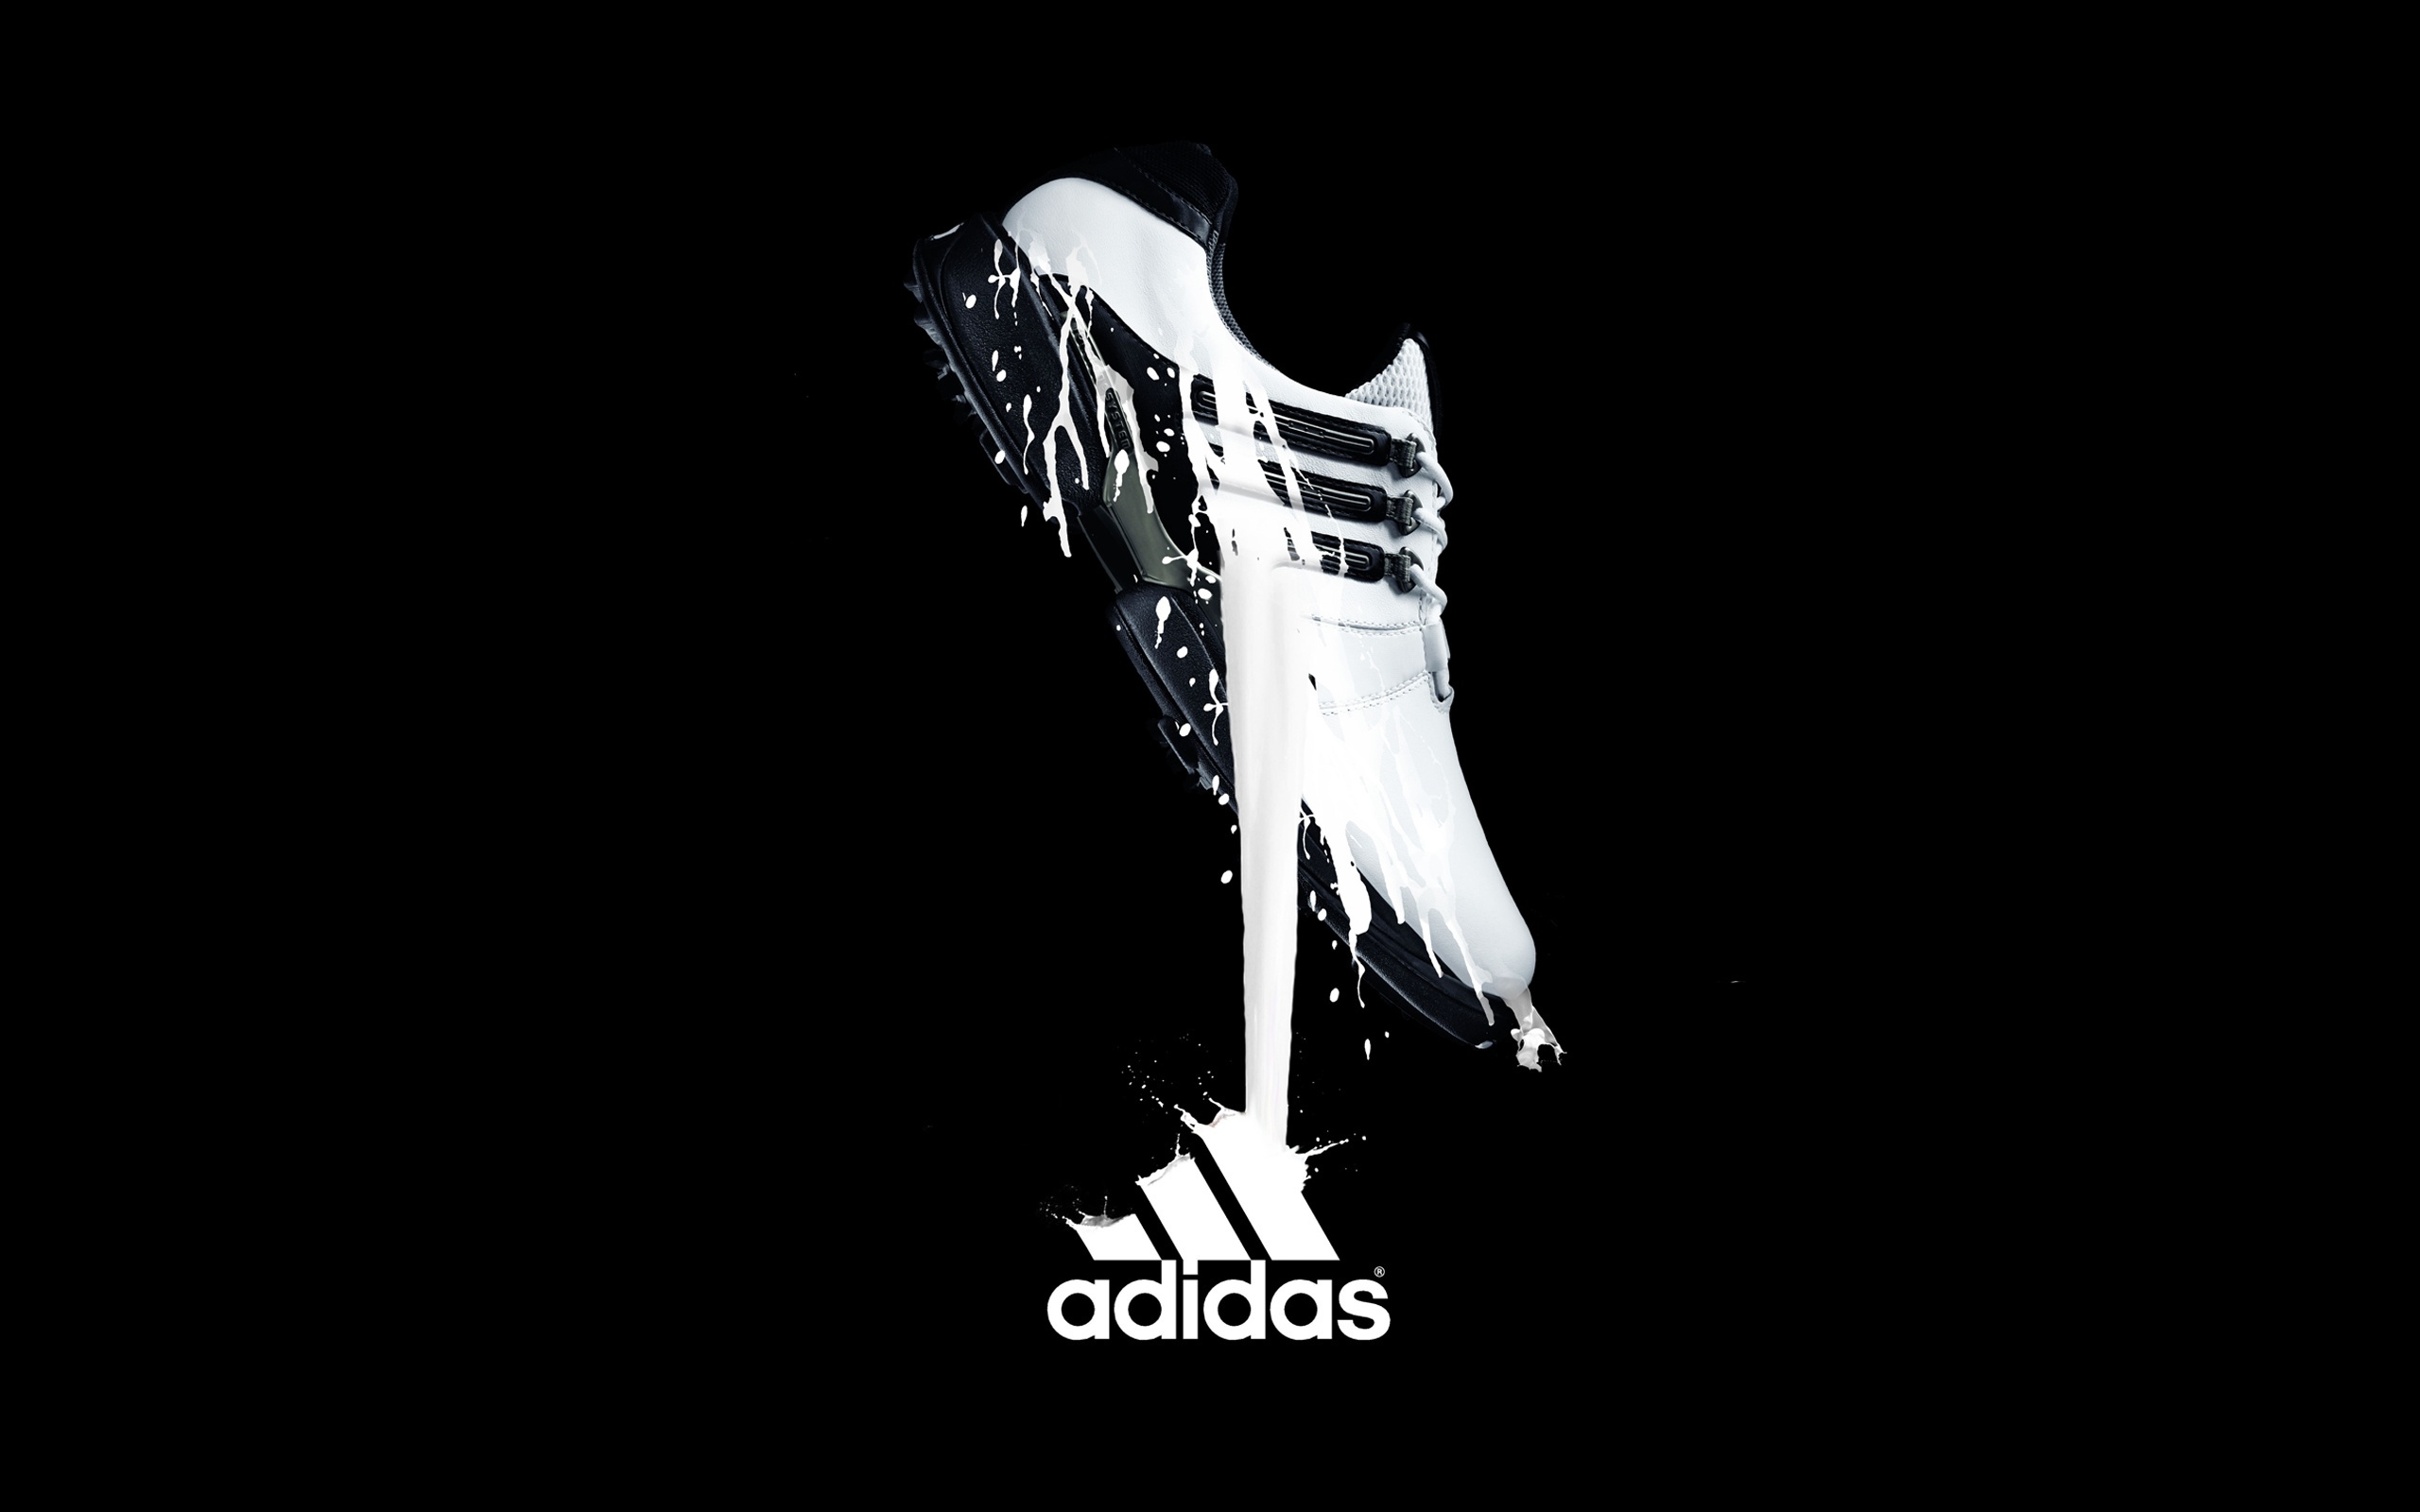 compact Gym Successful Adidas Wallpapers HD